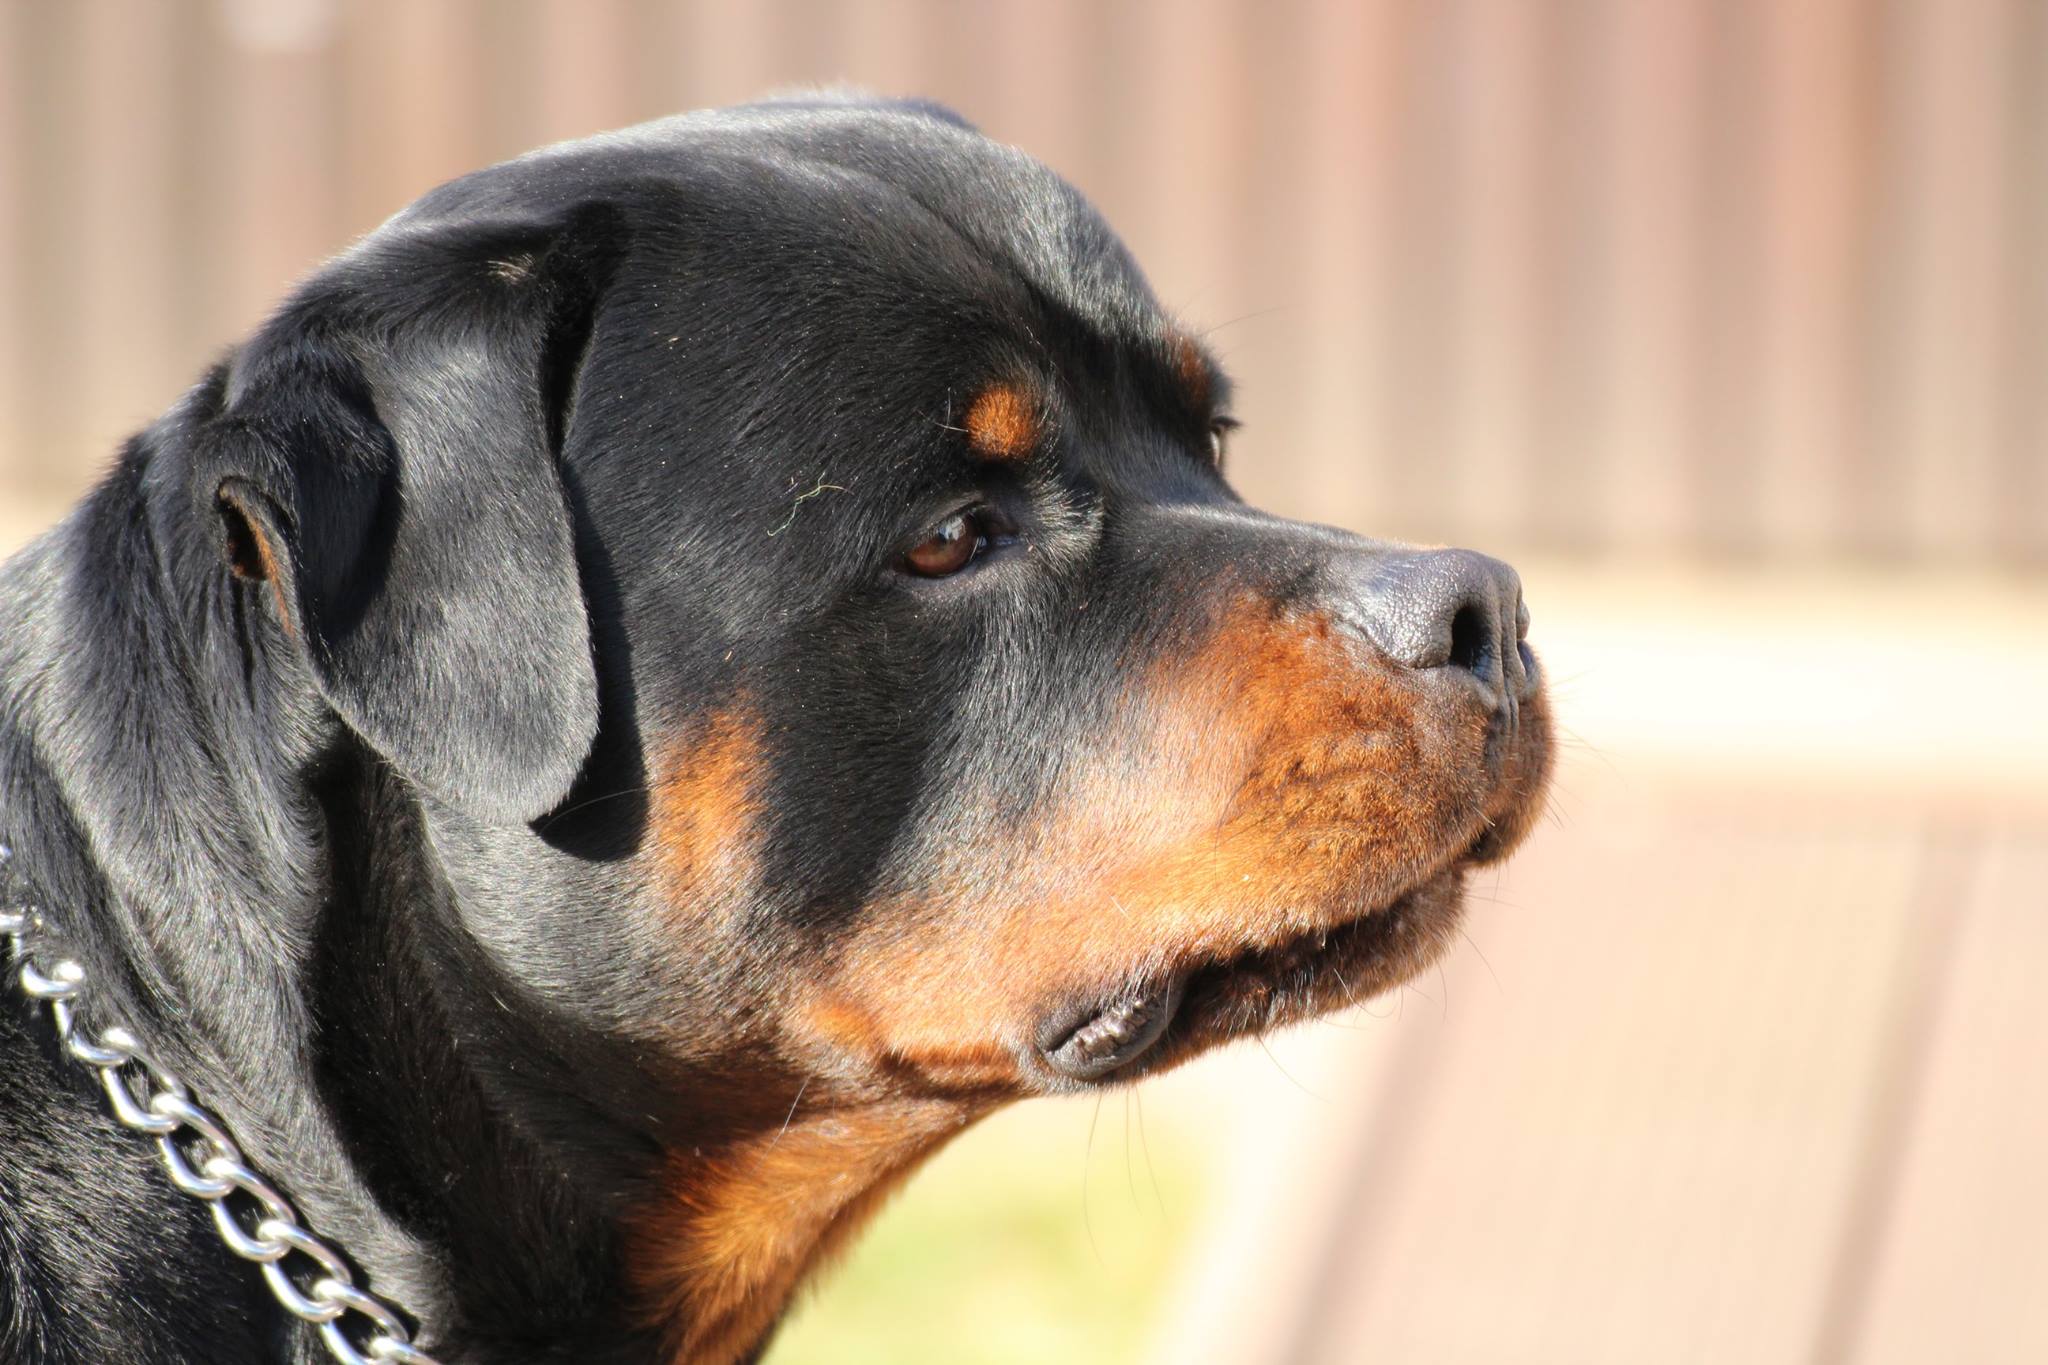 sideview face of a Rottweiler